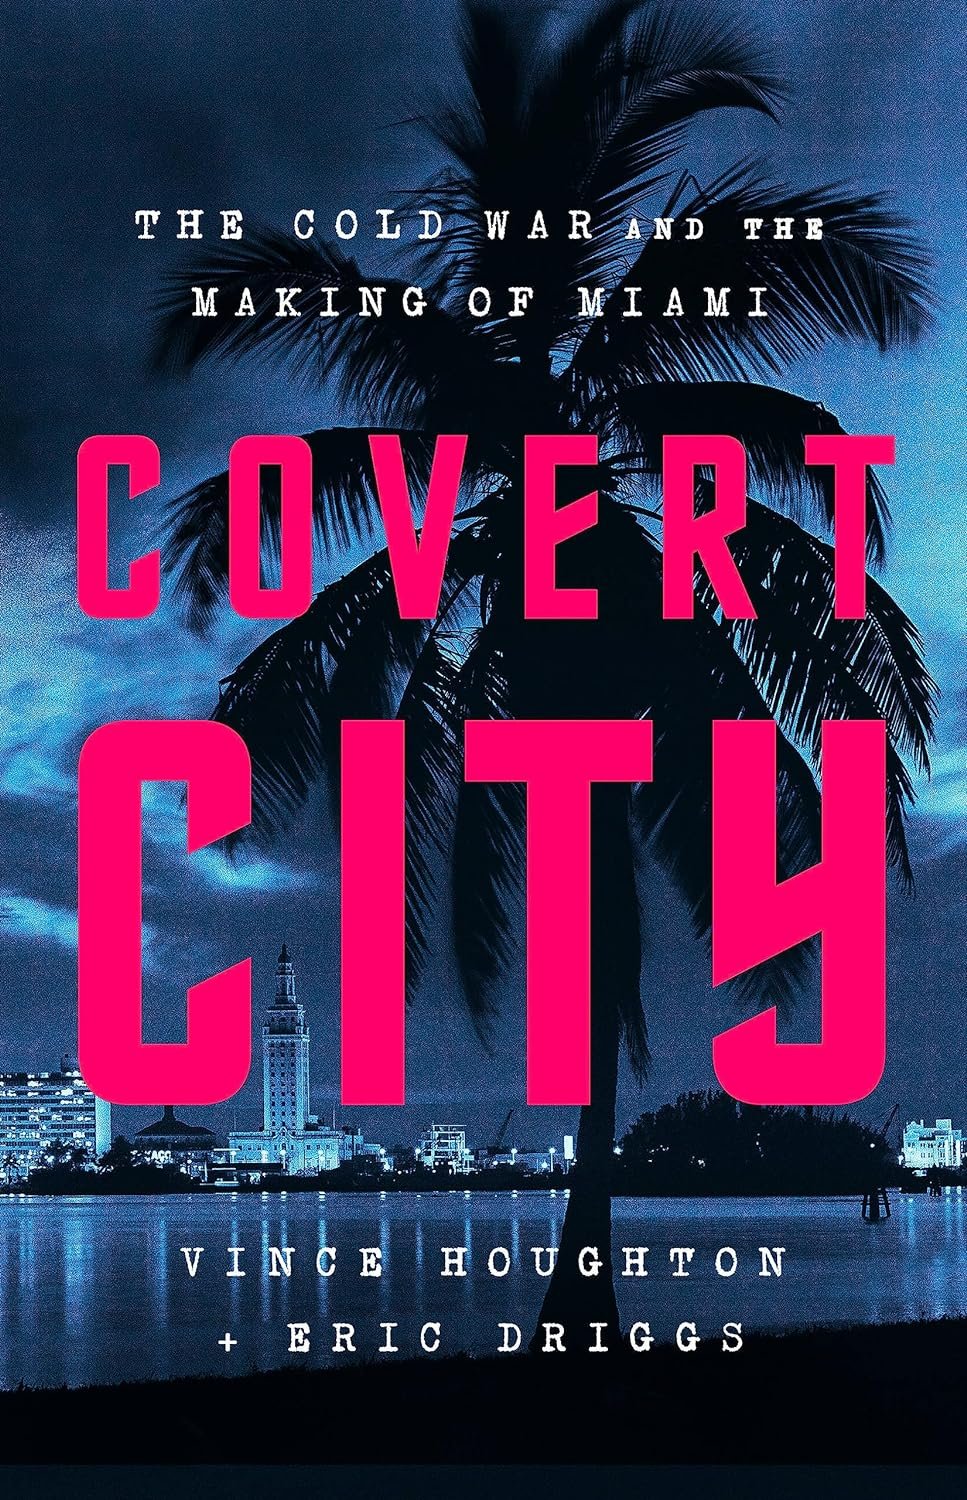 "Covert City" by Vince Houghton &amp; Eric Driggs (WSJ)